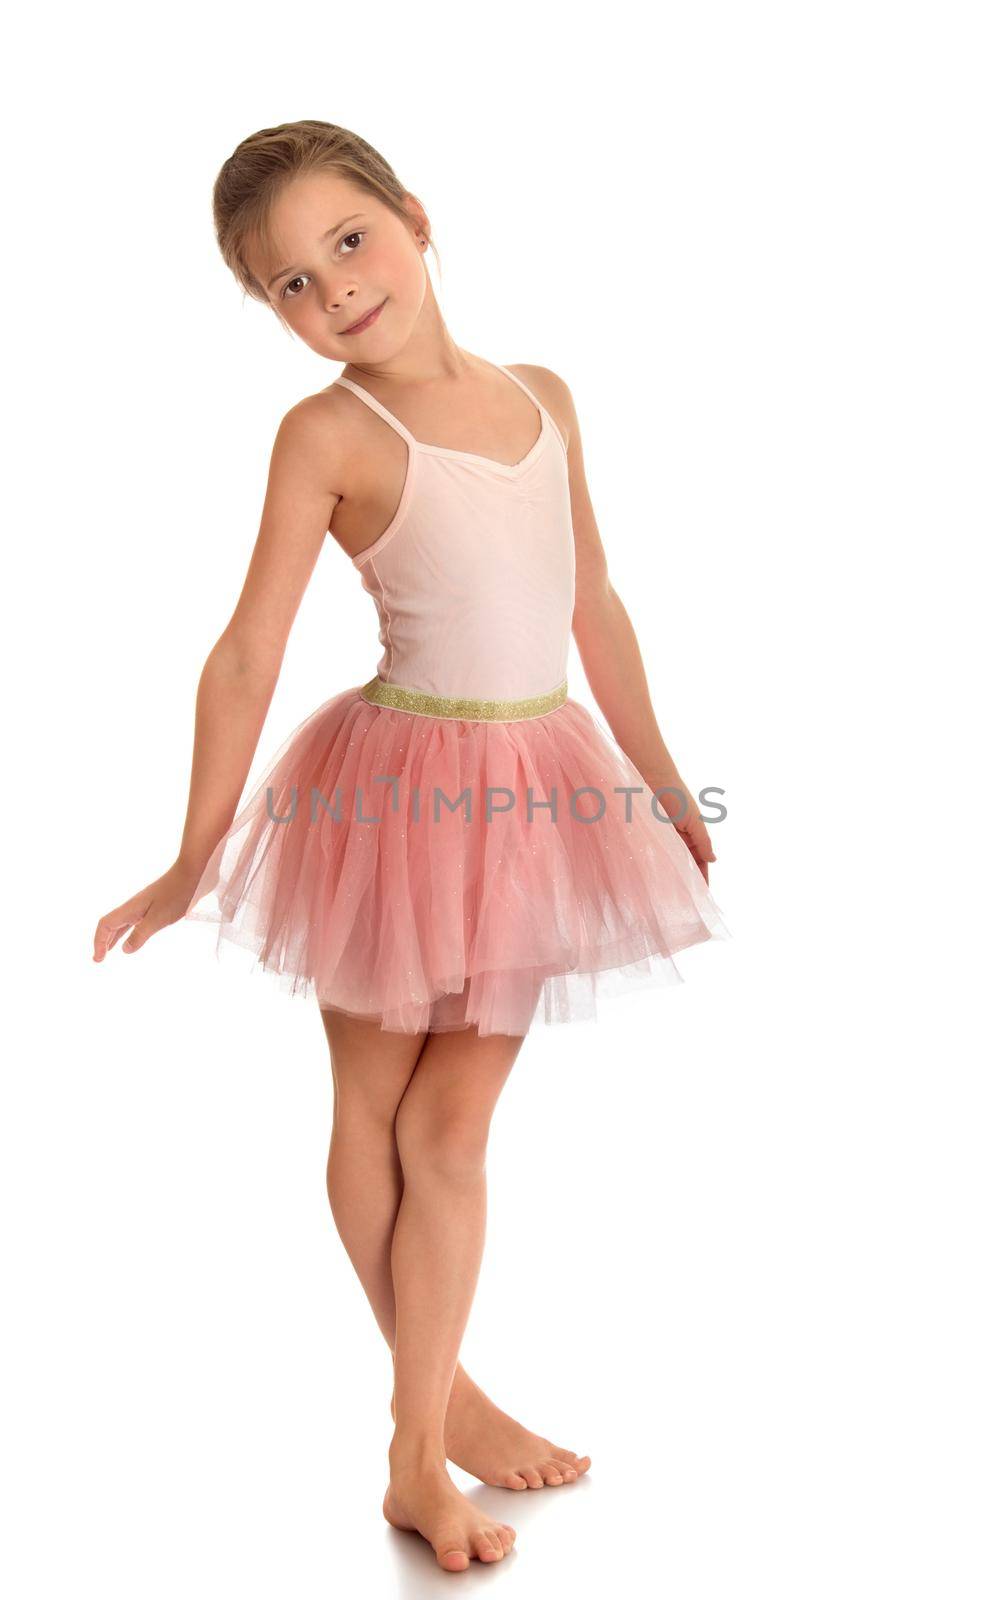 Beautiful barefoot girl gymnast in pink dress . the girl crossed her legs-Isolated on white background